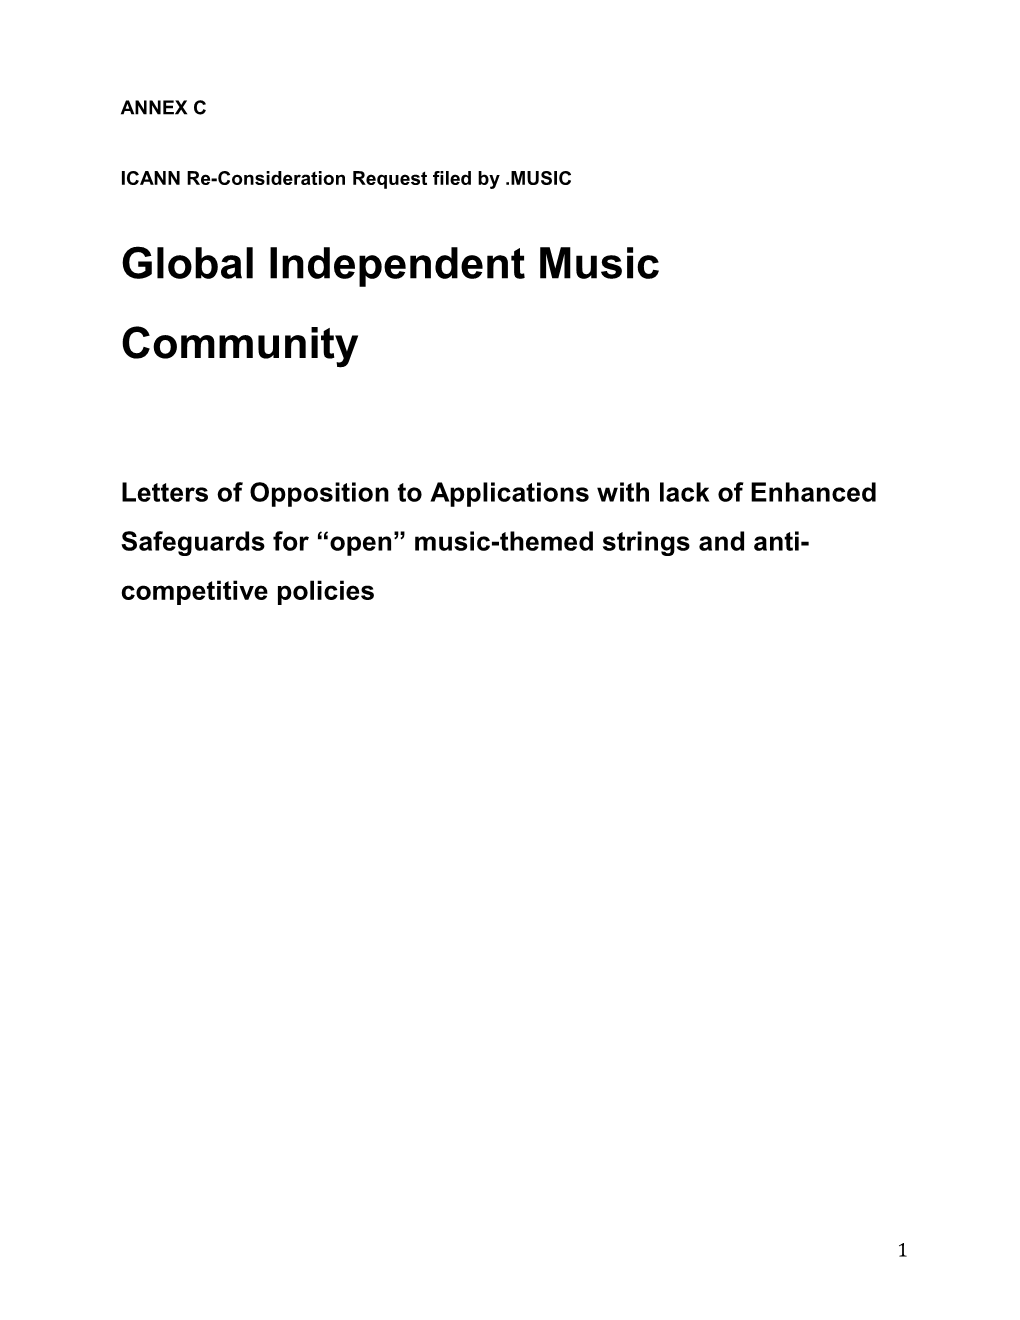 Global Independent Music Community